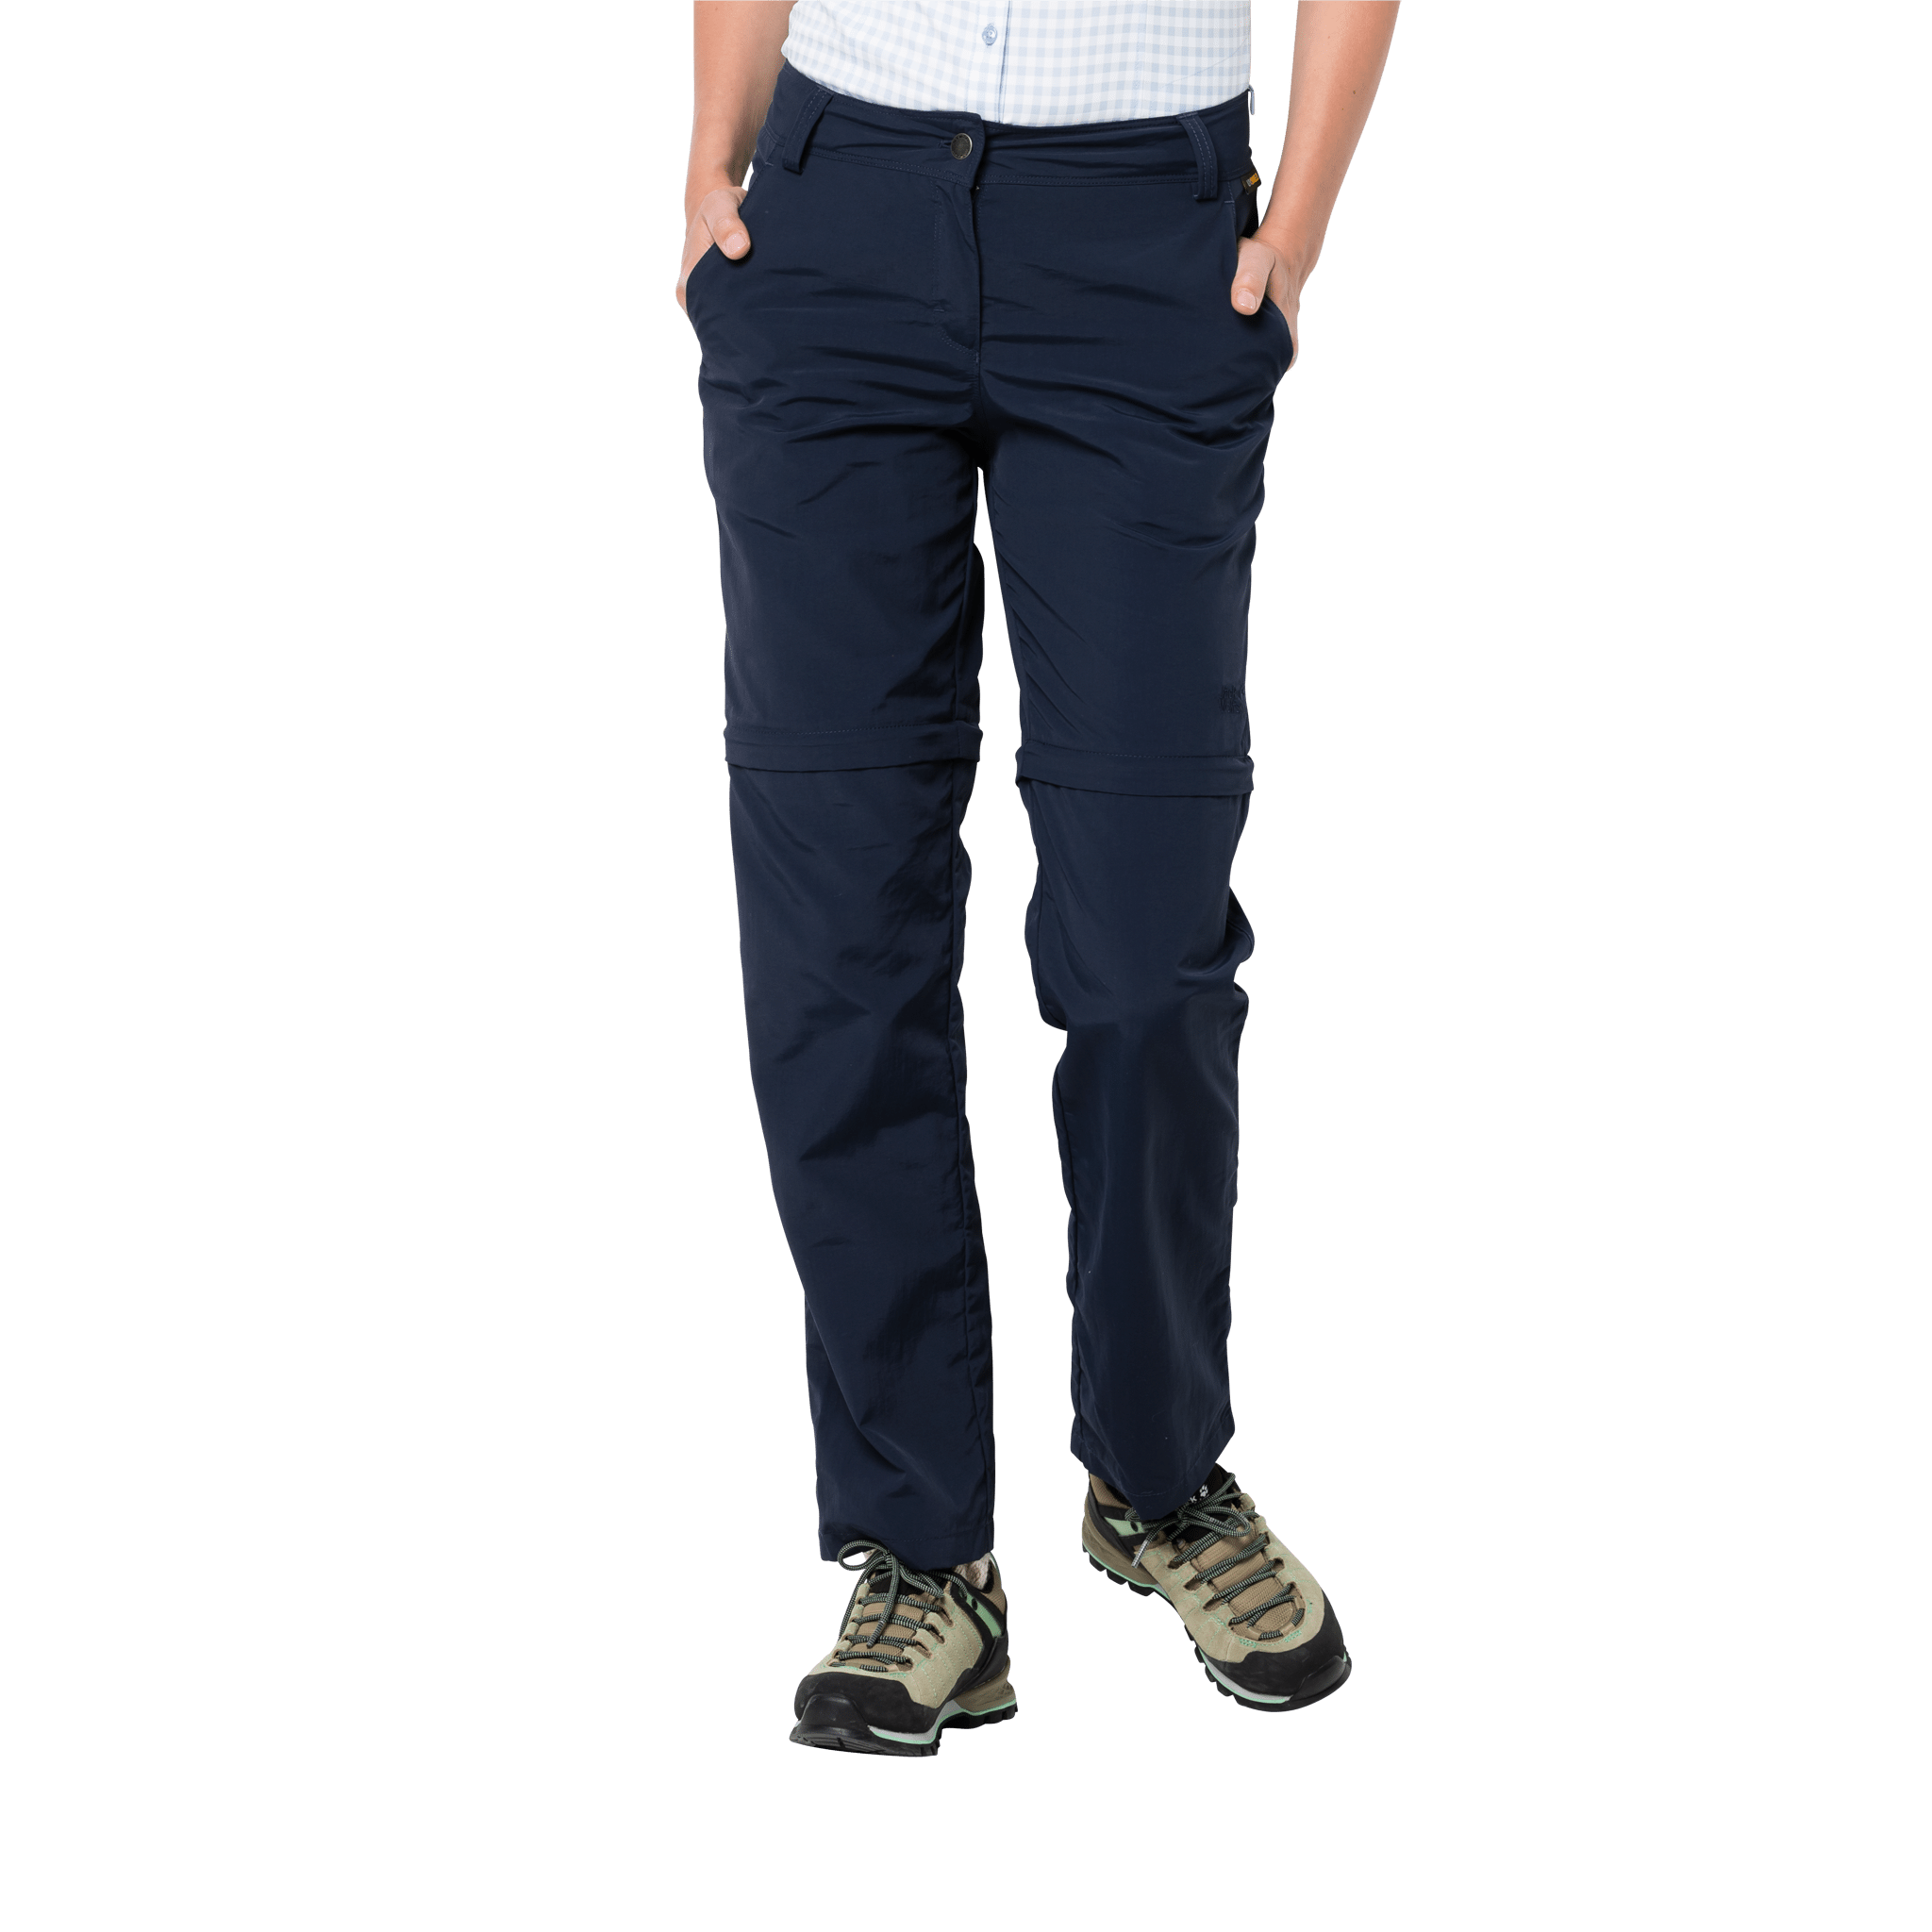 Buy Stone Convertible Trousers Online at Best Price | Mothercare India